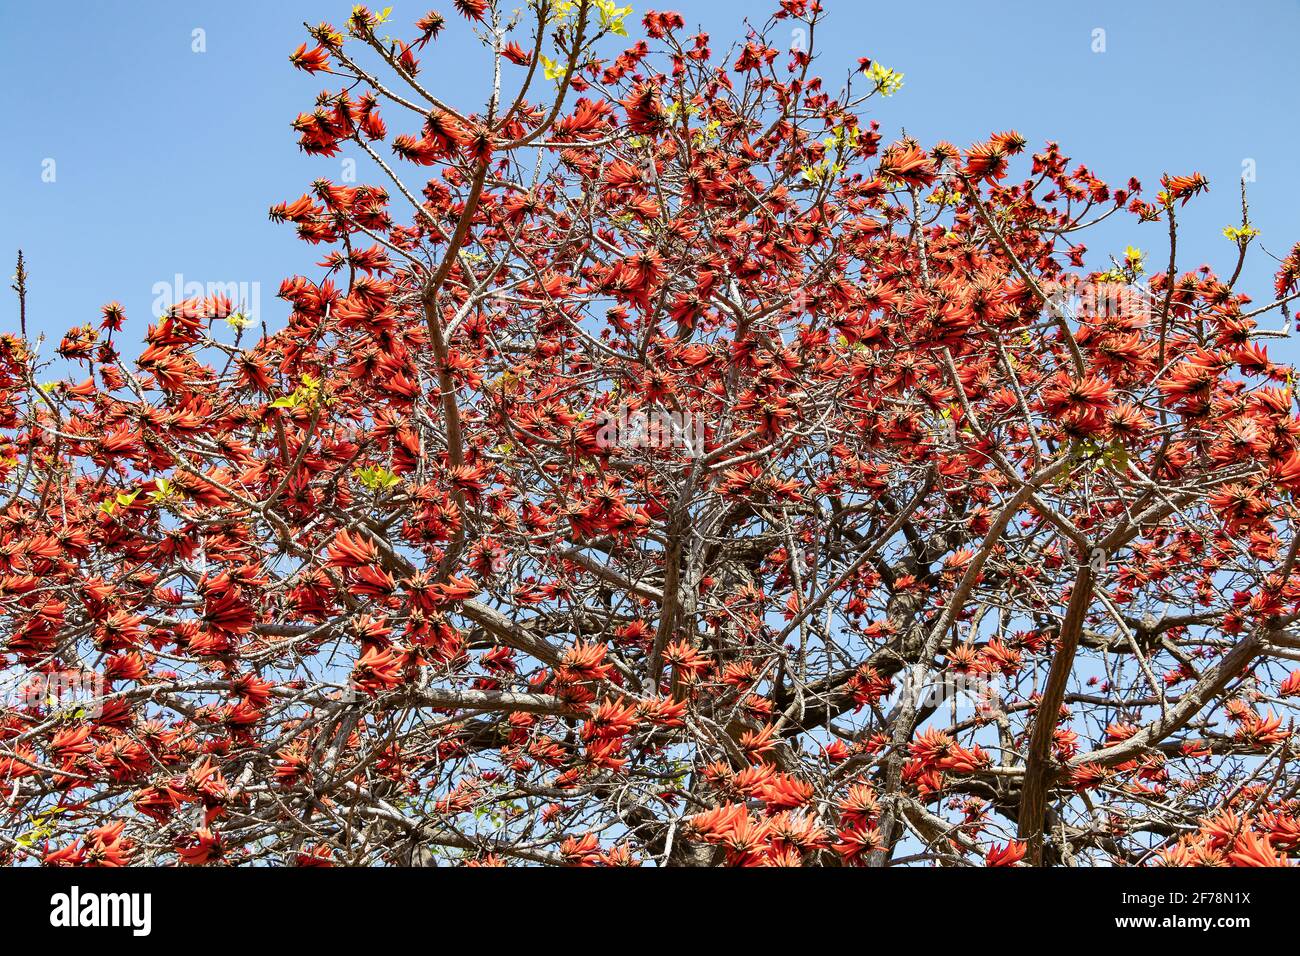 Erythrina caffra, the coast coral tree or African coral tree, is native to southeastern Africa, often cultivated and introduced in California. Conside Stock Photo